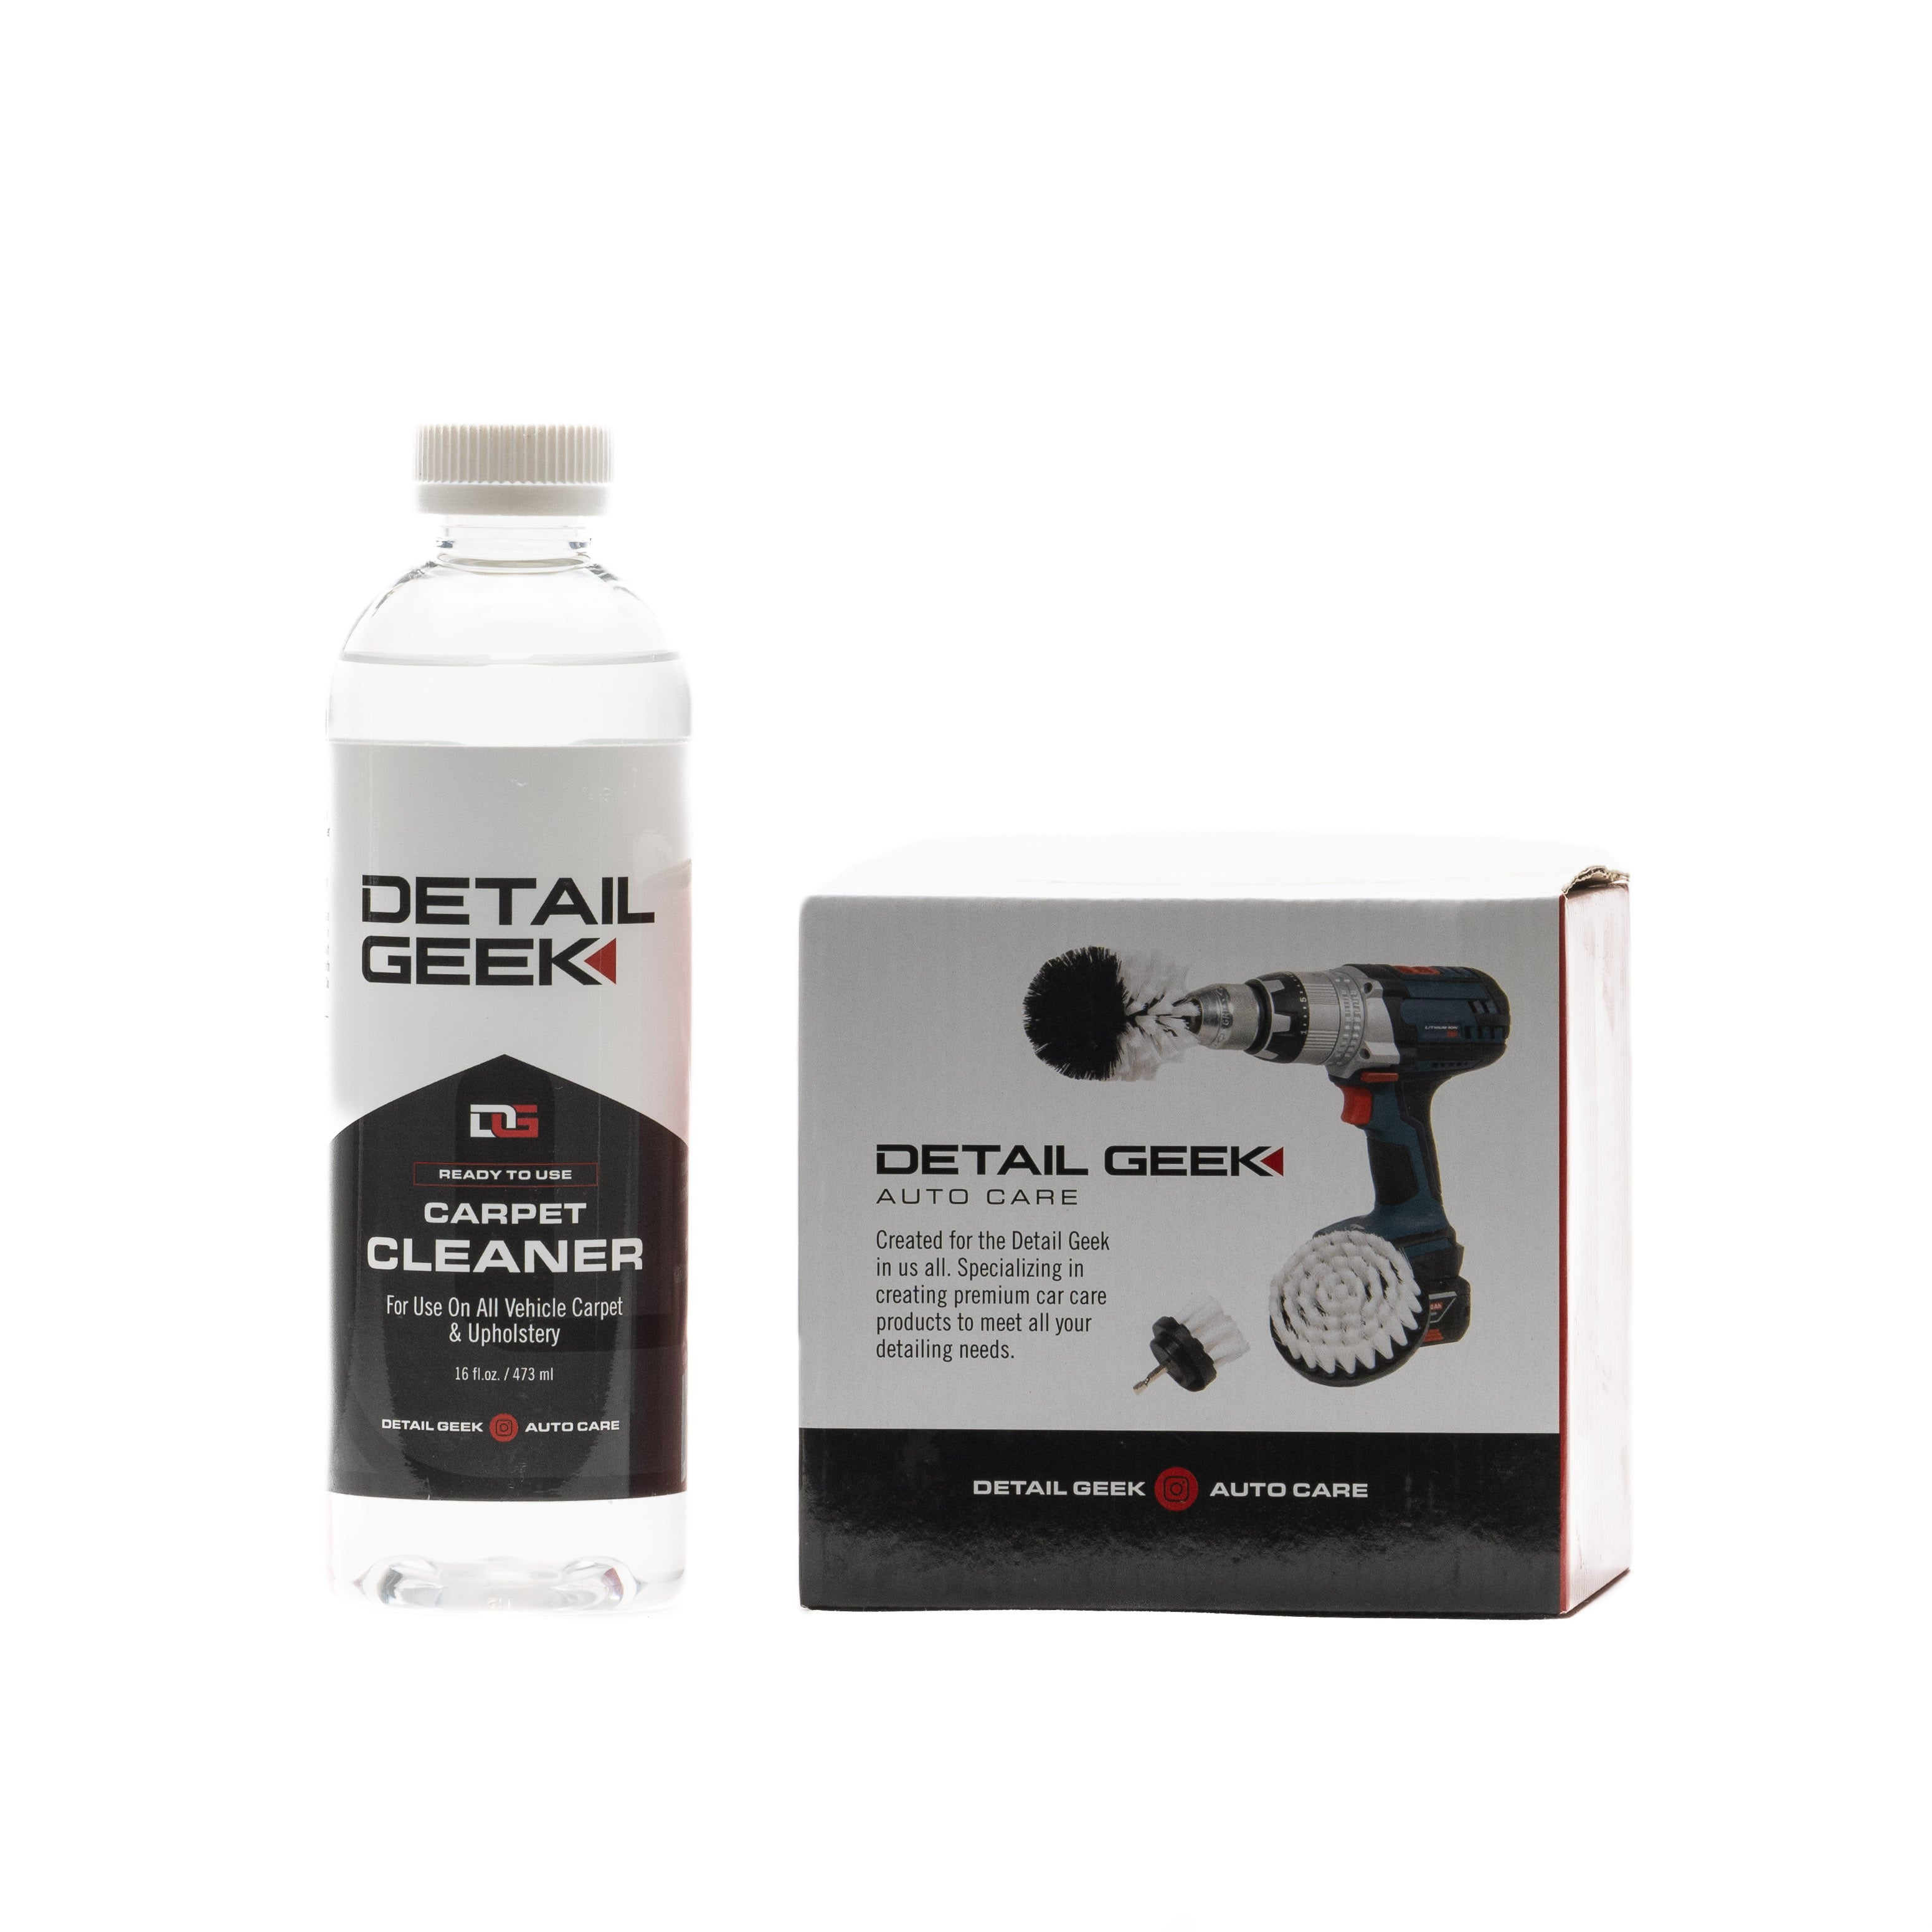 Geek Center - Pro Detailer Product Review & How-To Guides